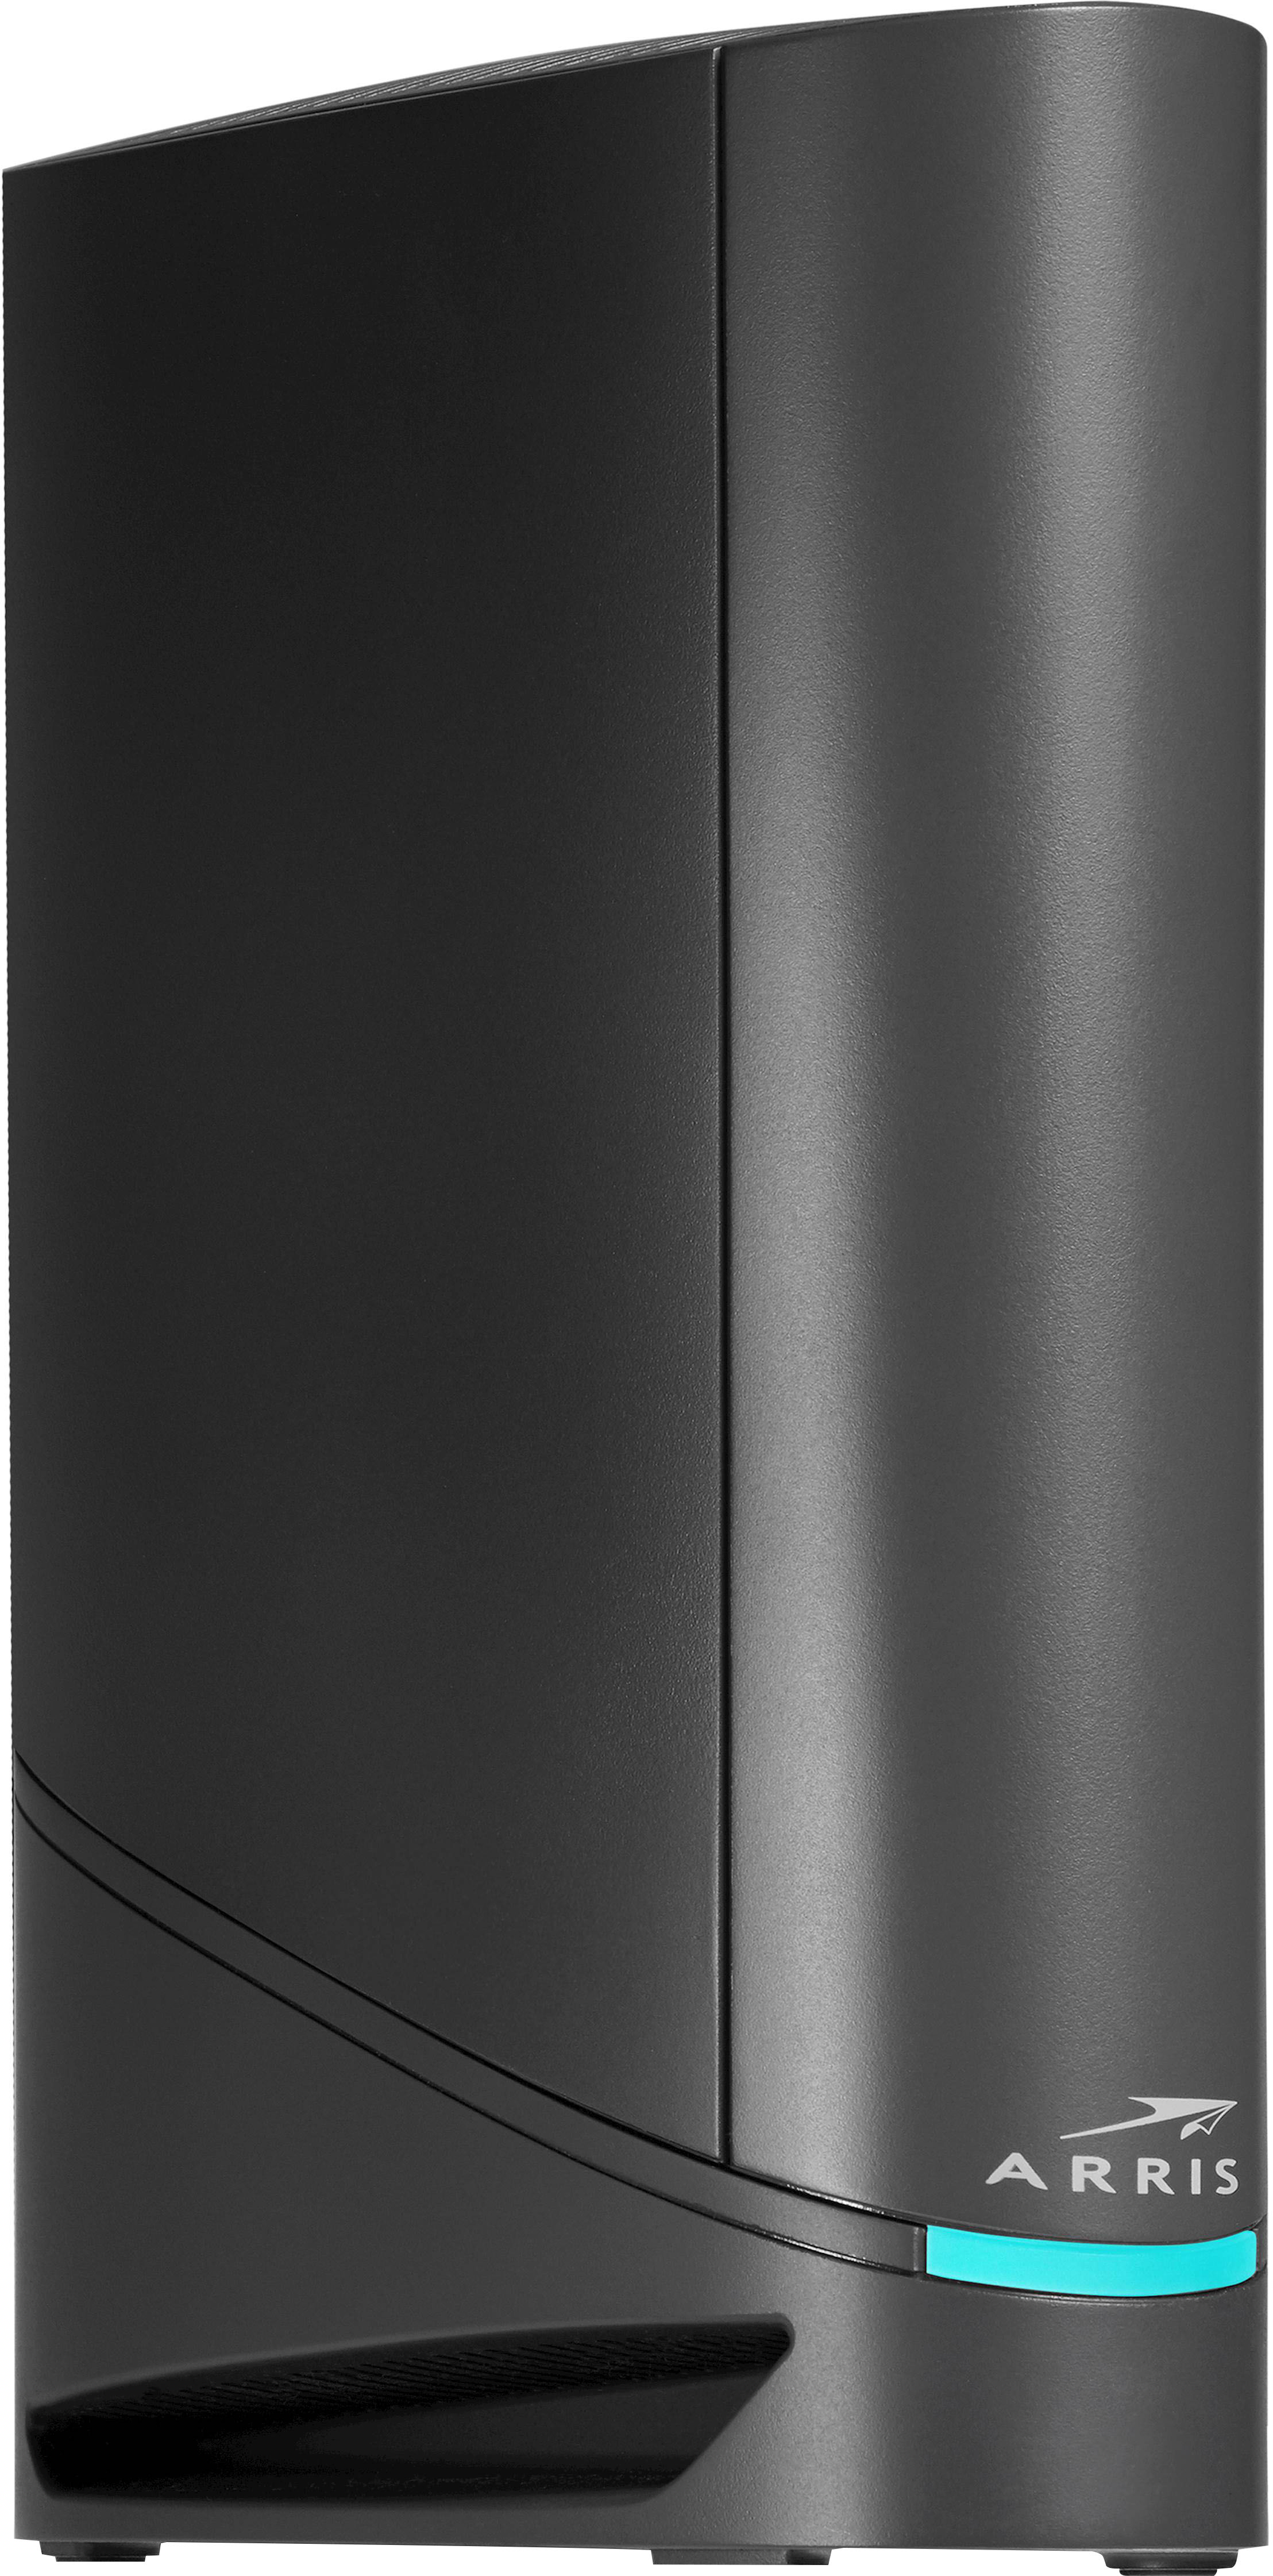 Angle View: ARRIS - SURFboard DOCSIS 3.1 Cable Modem & Wi-Fi 6 Router Combo - Black